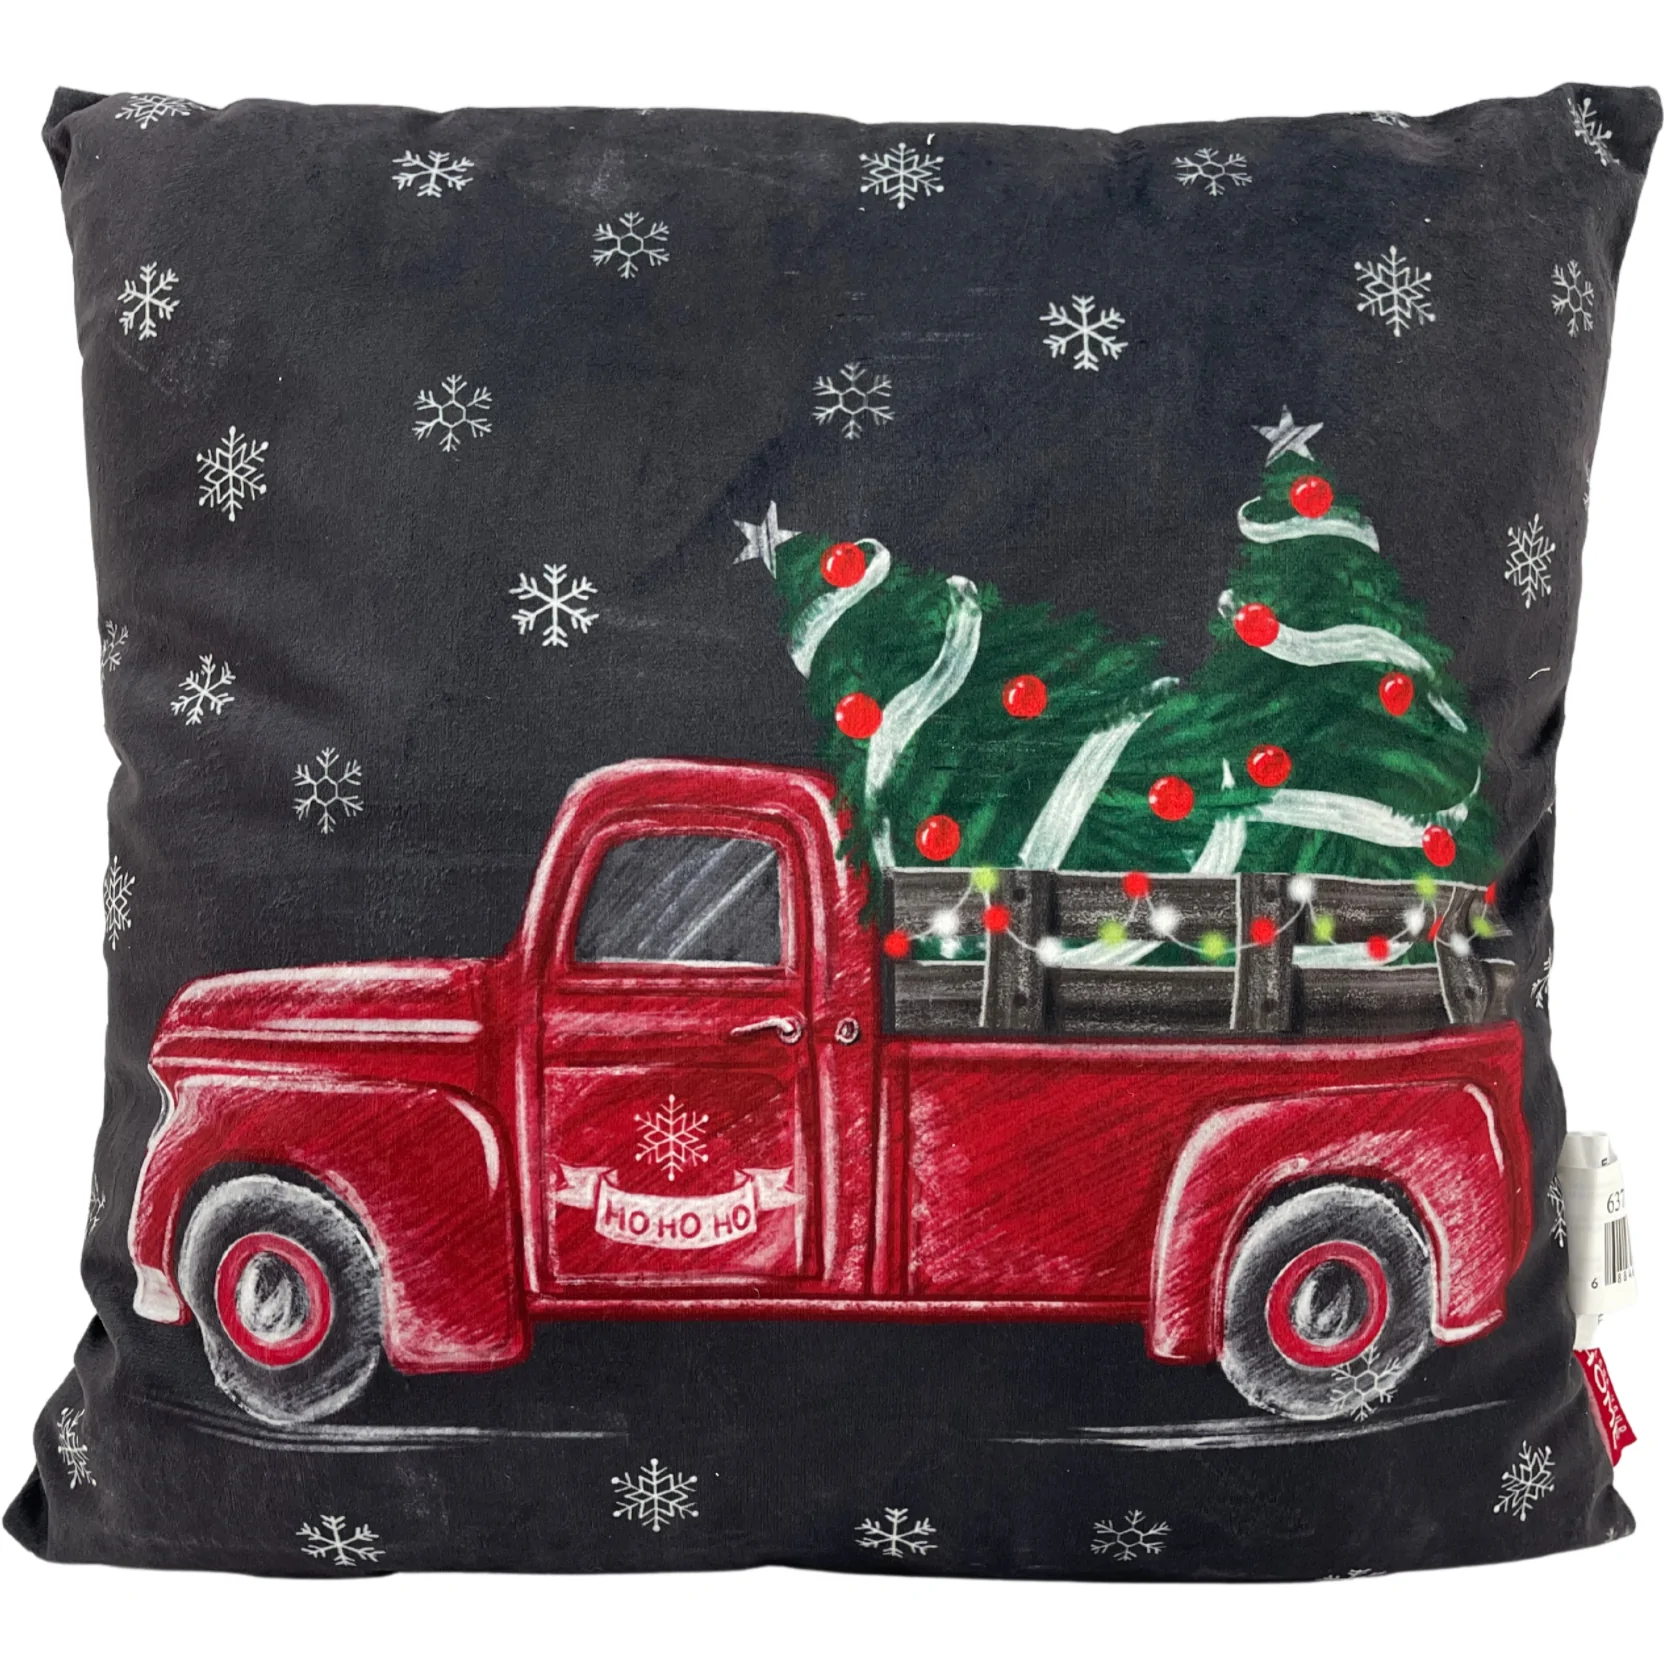 Home Decor Christmas Couch Pillow / Red Truck with Christmas Tree / Home Accent / Seasonal Decor / 17"x17"